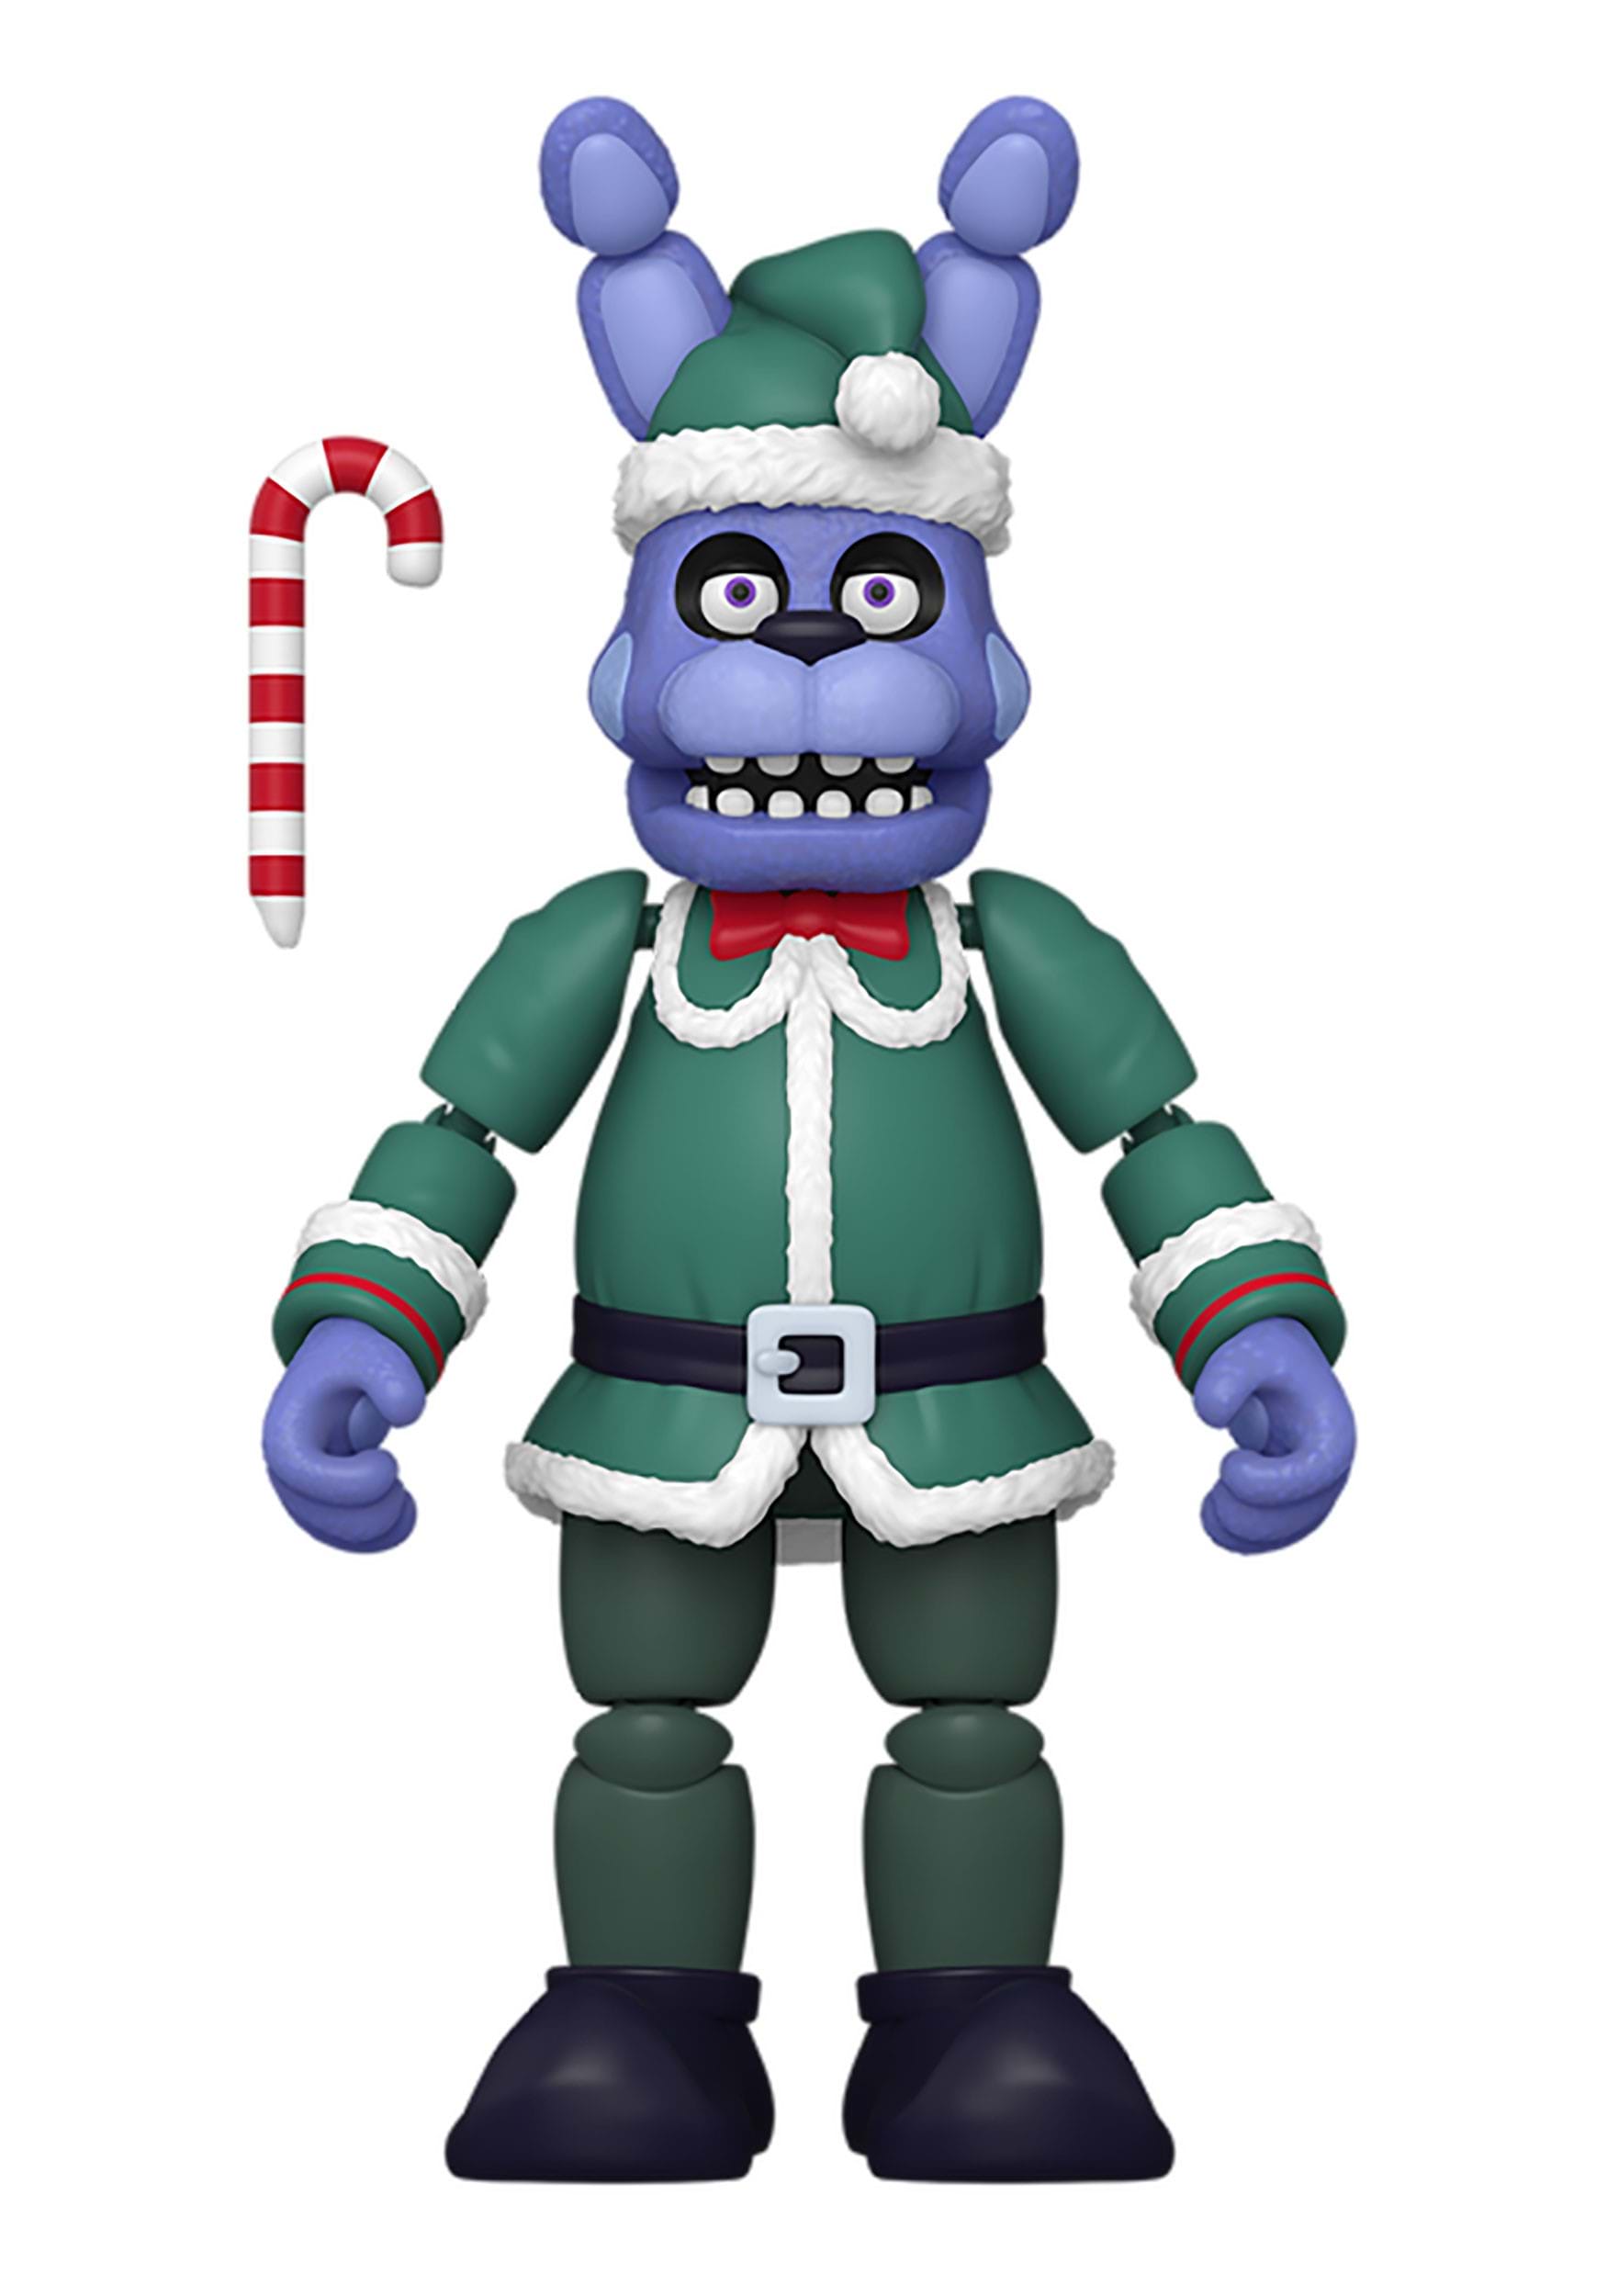 Five Nights at Freddys Elf Bonnie Funko Action Figure | Video Game Action Figures